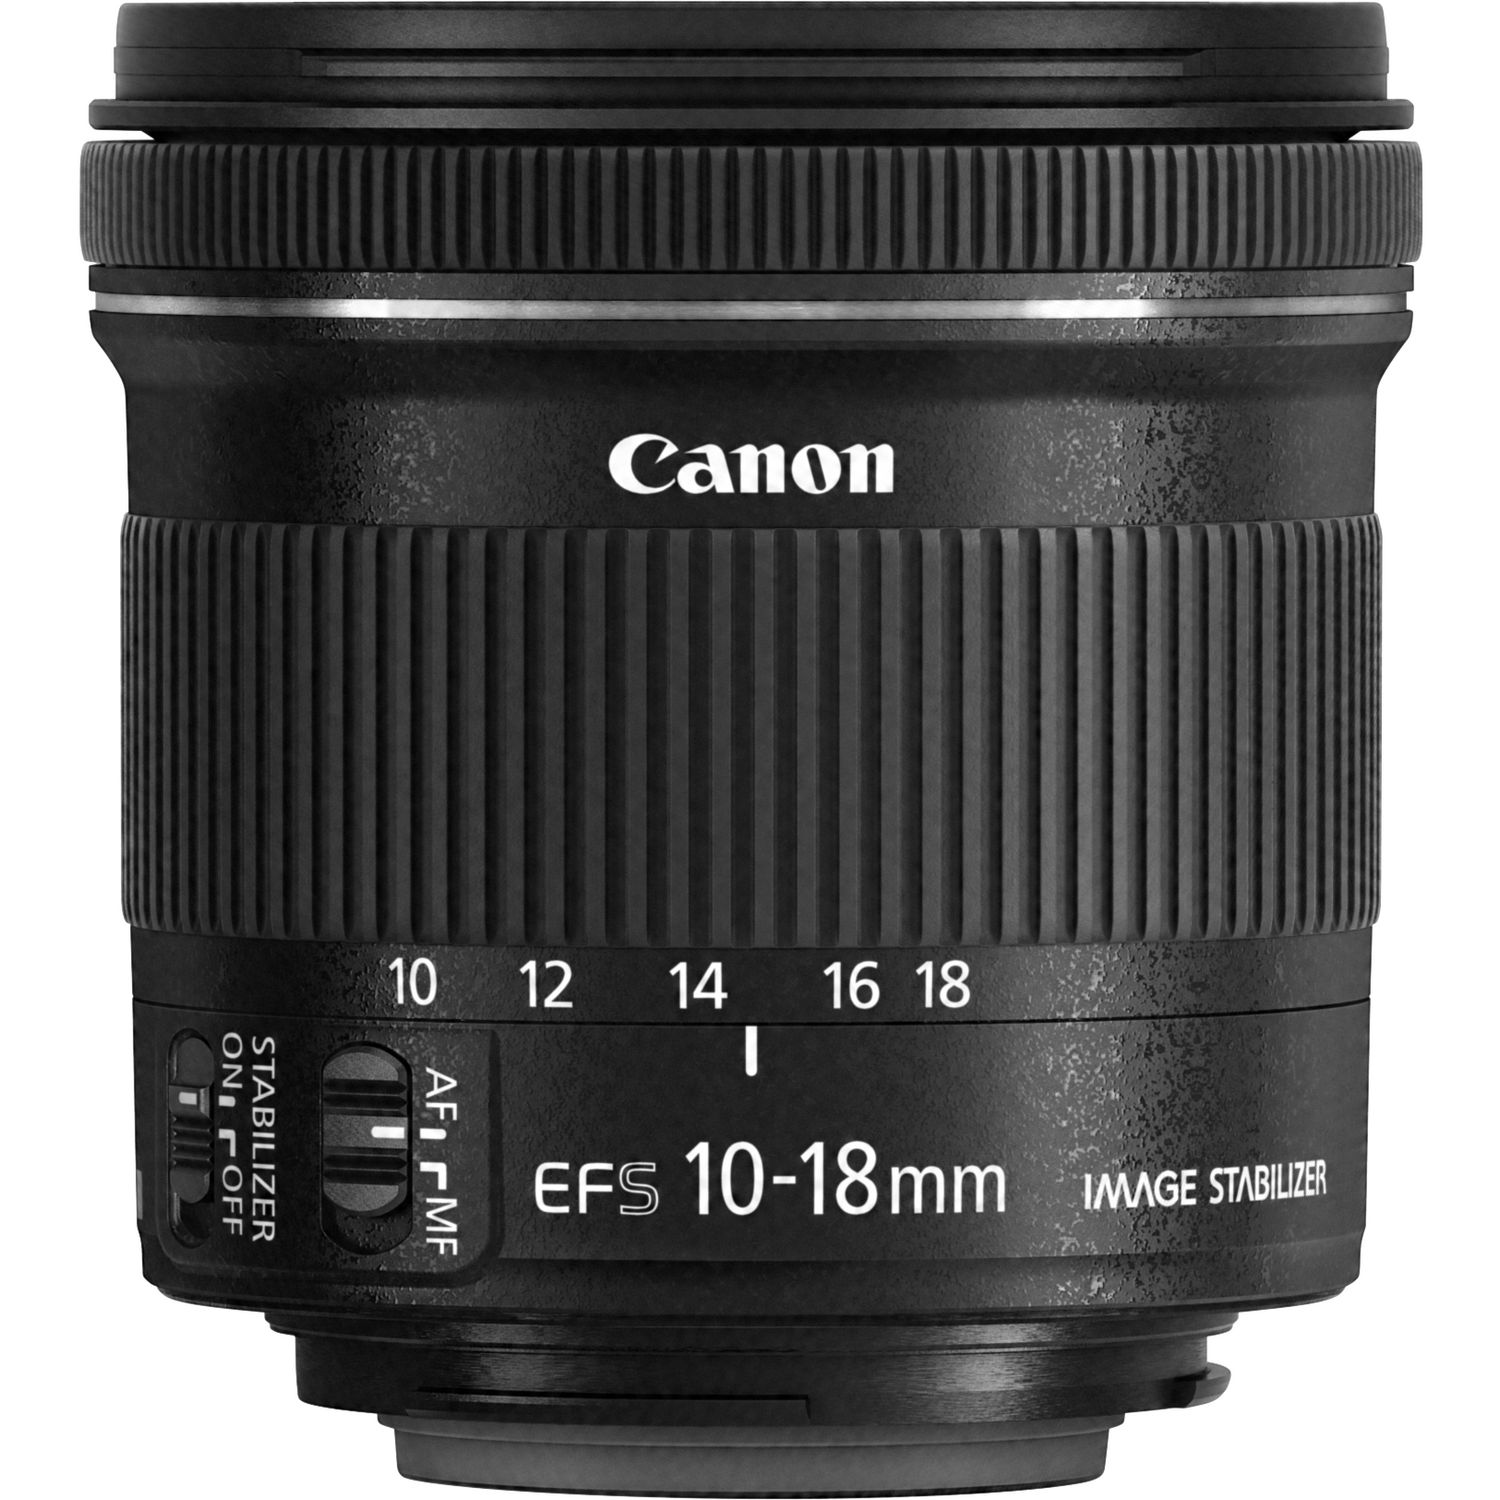 Objectif Canon EF-S 10-18mm f4.5-5.6 IS STM-CAN10229A-BLK